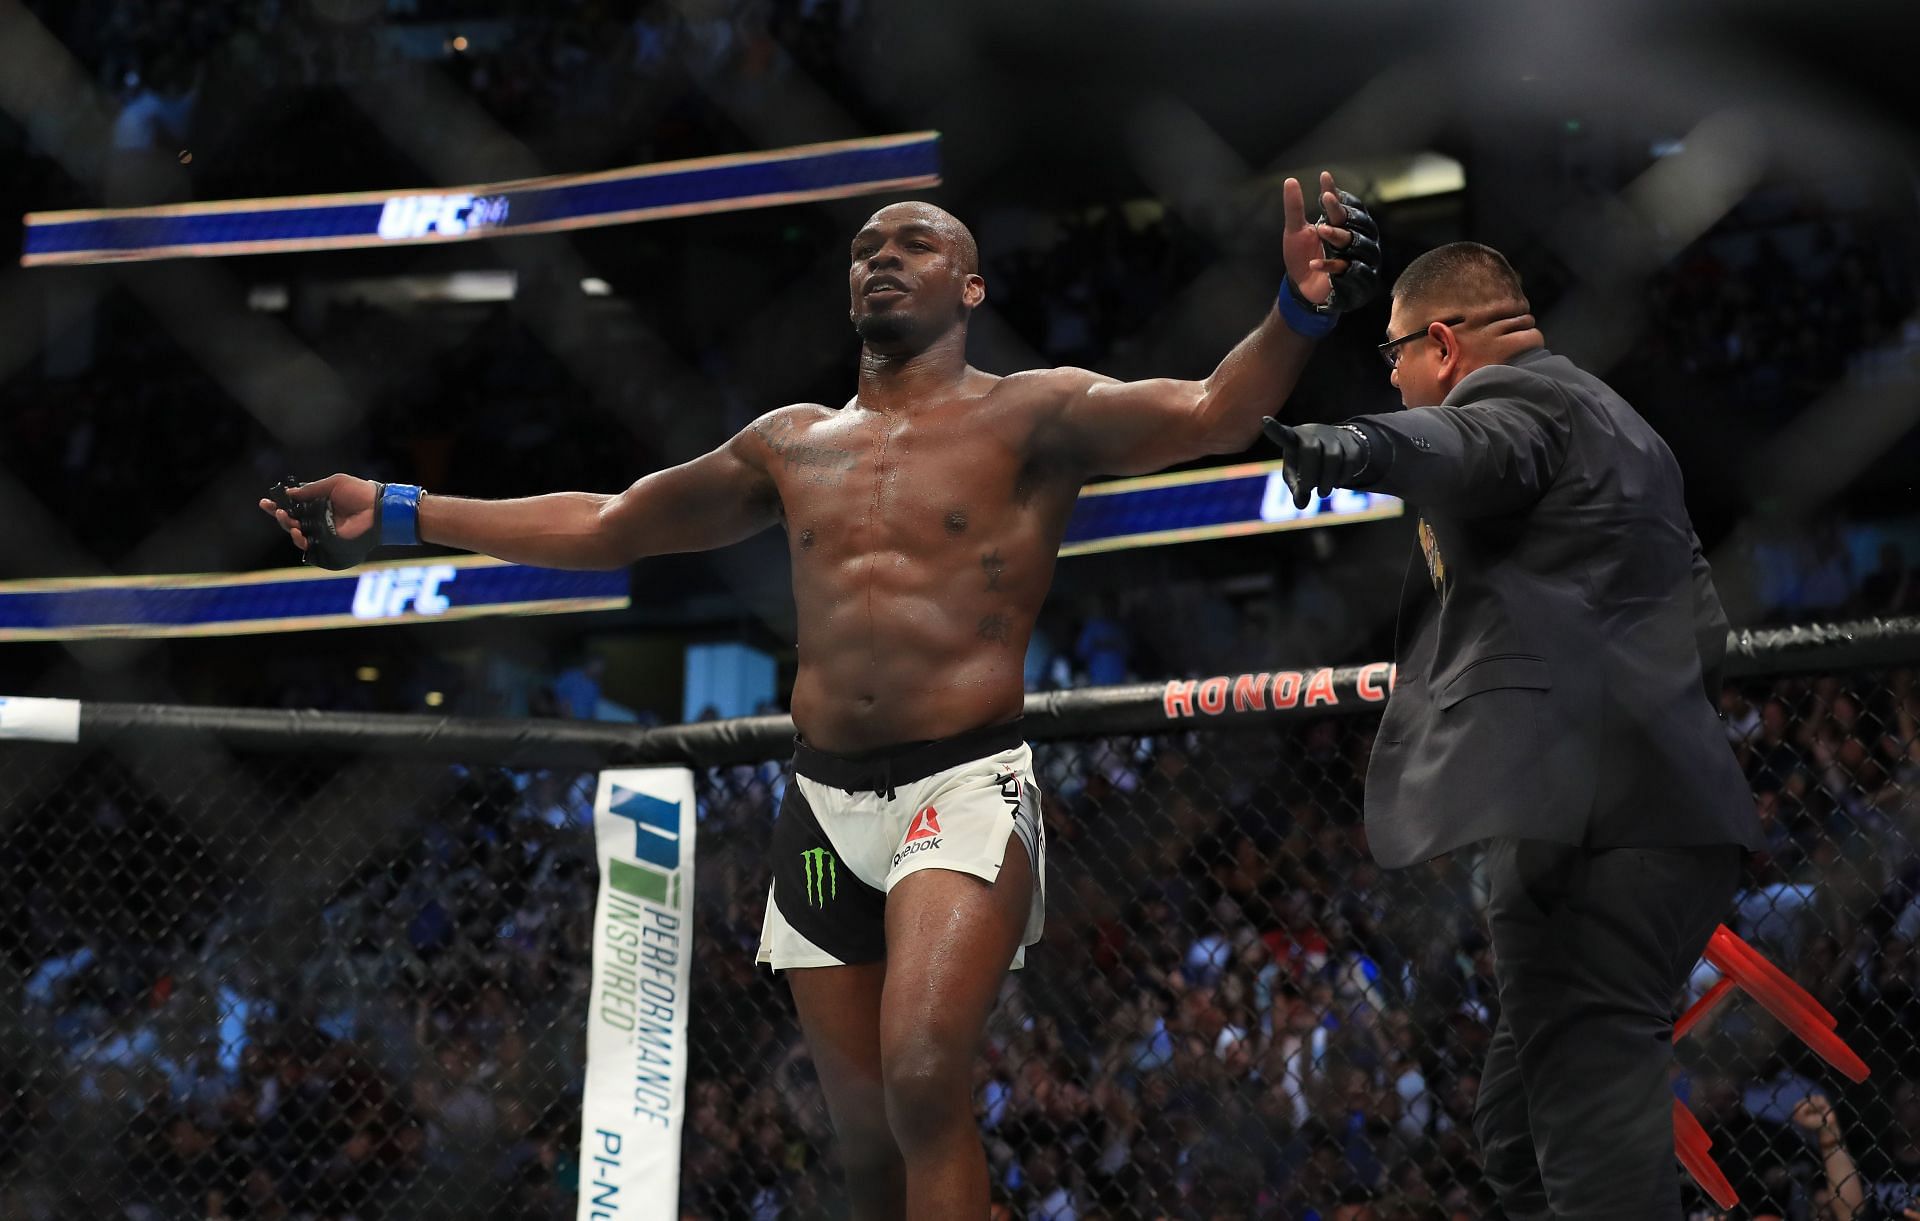 Jon Jones vacated the UFC light-heavyweight title without ever losing it, meaning he went out on top